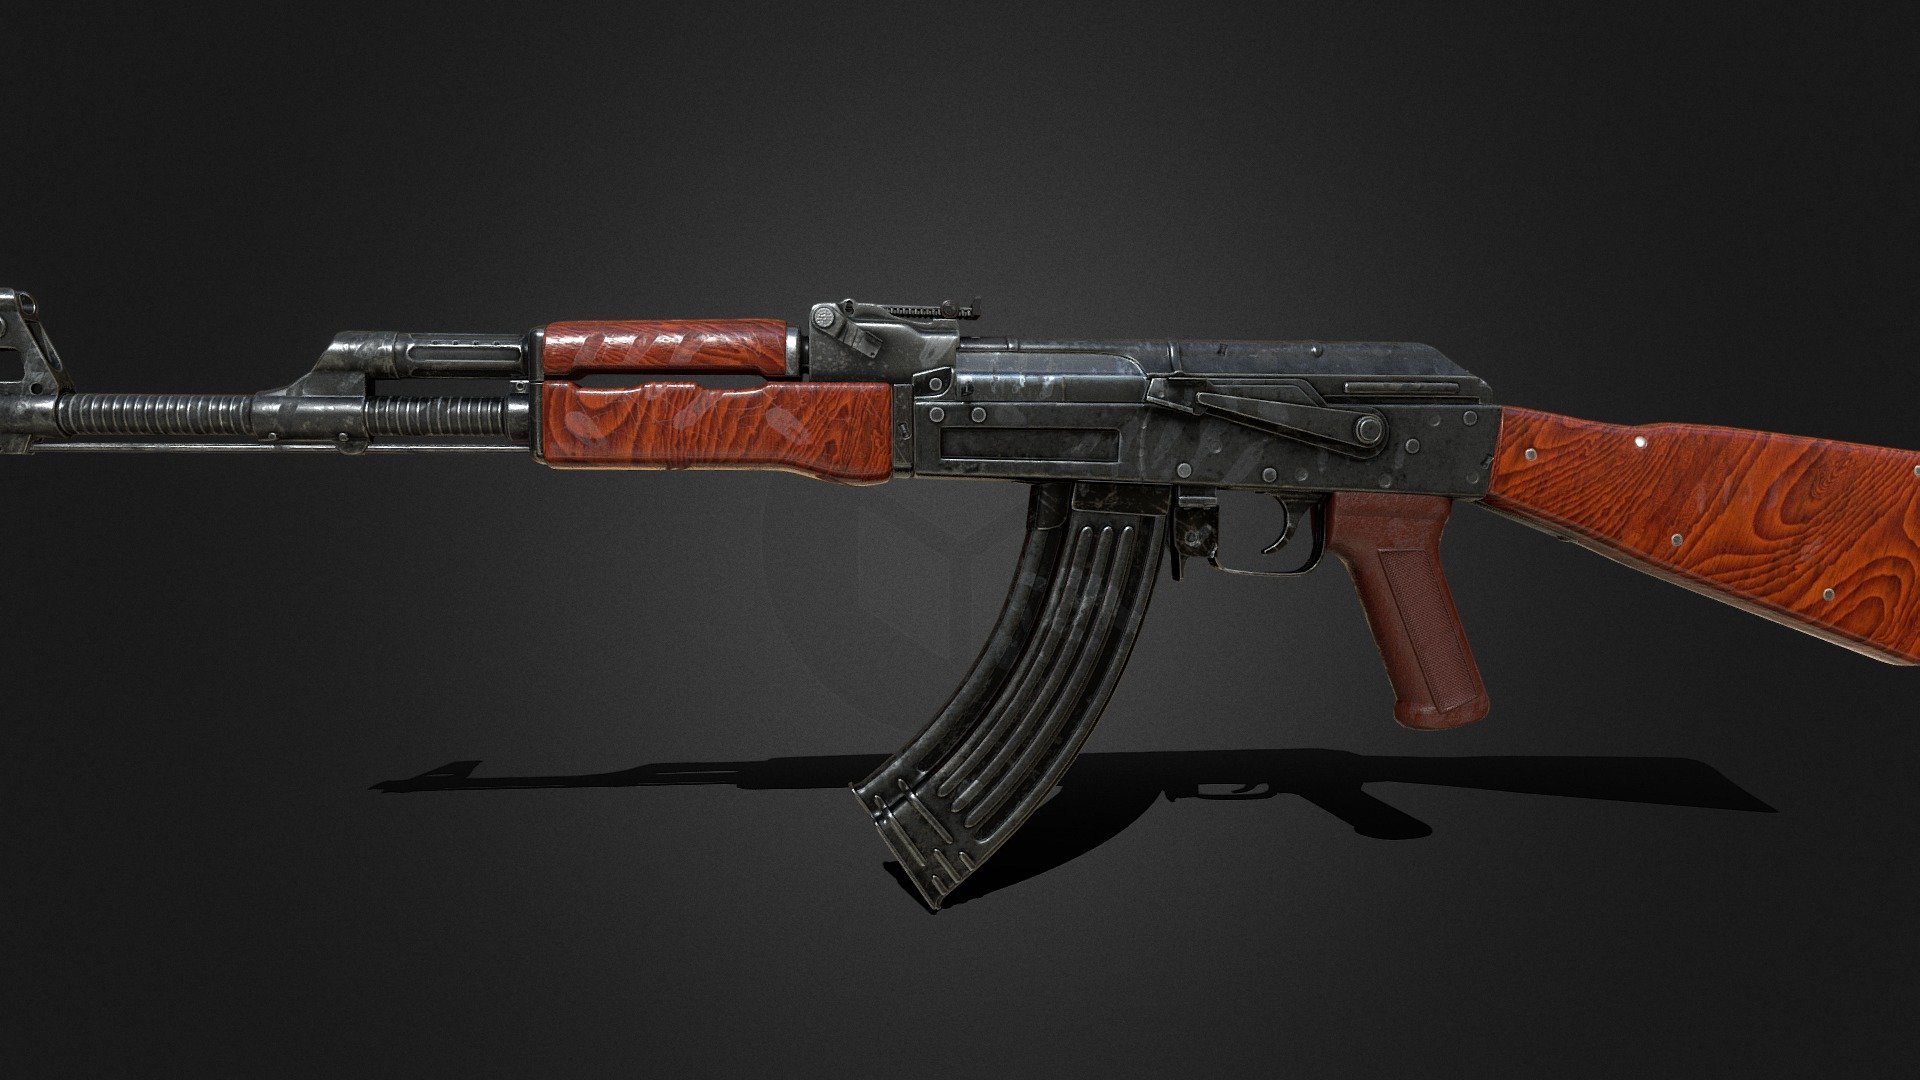 ÄK-47 Rifle

Modeled in Blender, Texture in Substance Painter . 4K High Resolution Texture.

Gameready

I work as a freelancer on the Fiverr platform:
https://www.fiverr.com/jakubivanco/create-3d-game-art-models-for-your-game

I will be very happy for a review or comment - AK-47 Rifle - Buy Royalty Free 3D model by Jakub (@Majronator) 3d model